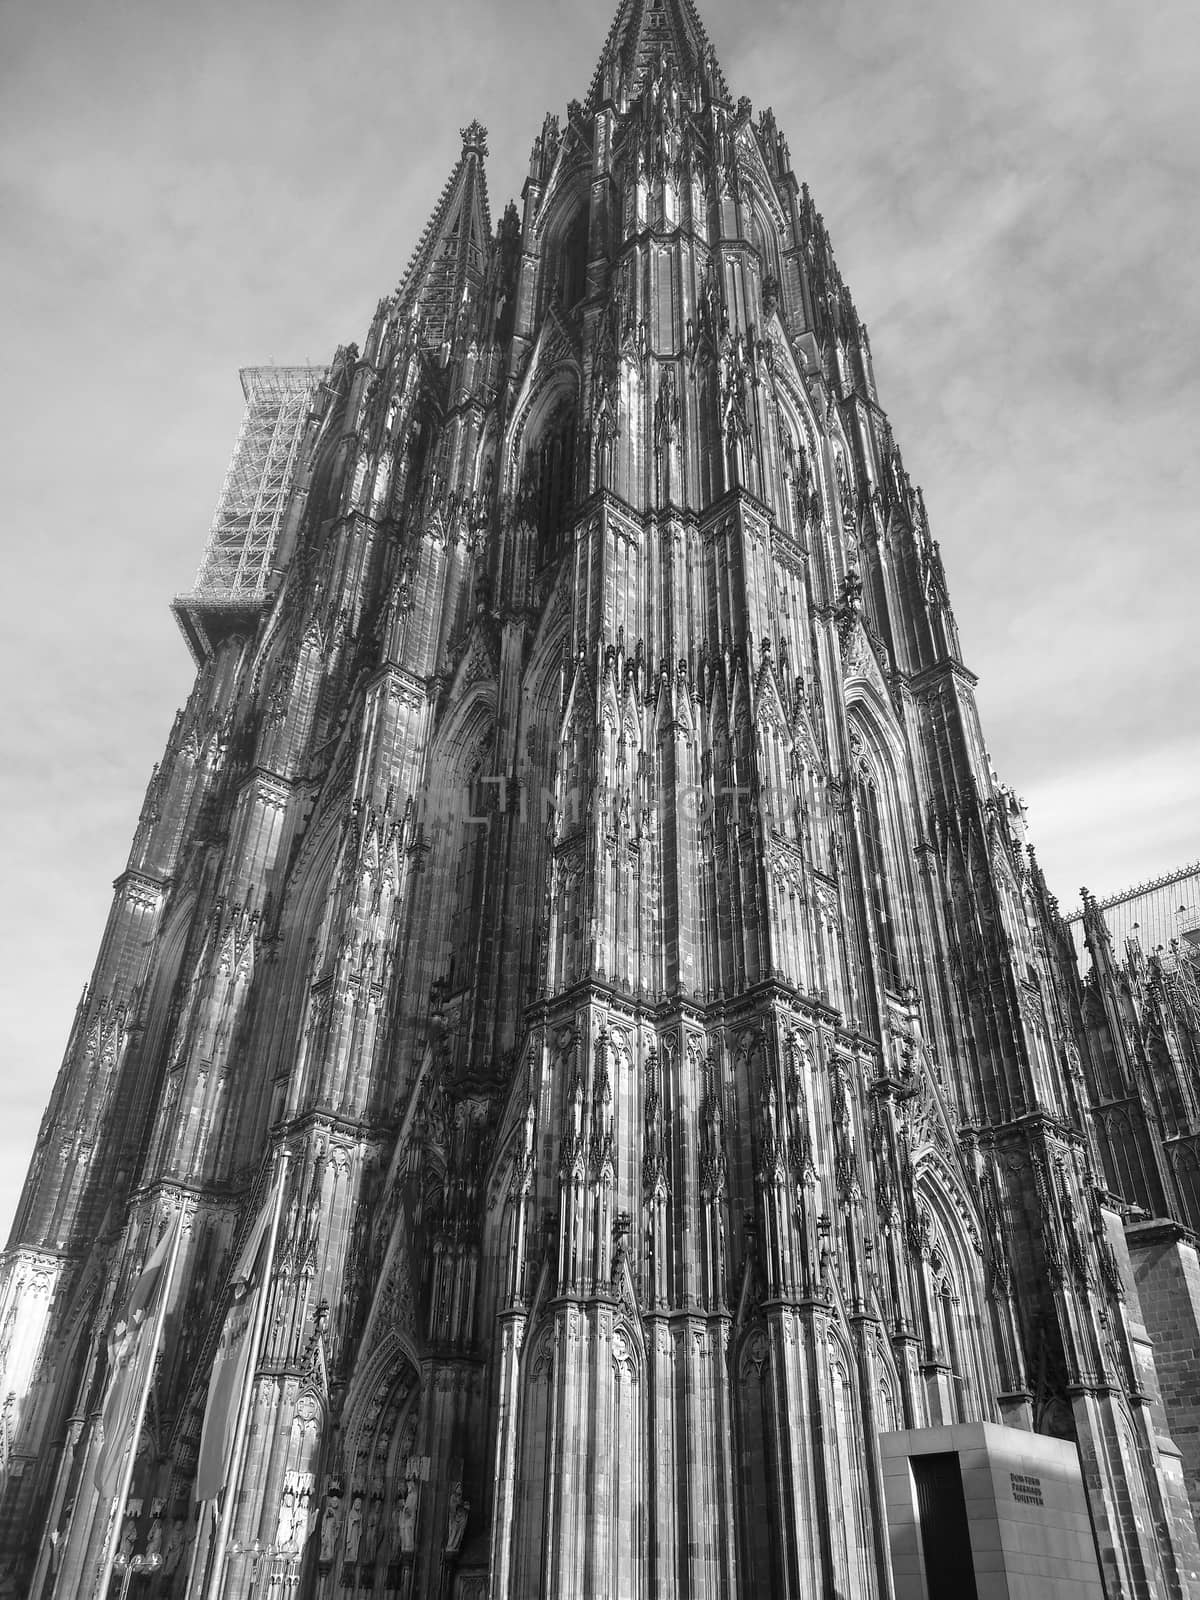 The mighty Cologne Cathedral  by balage941